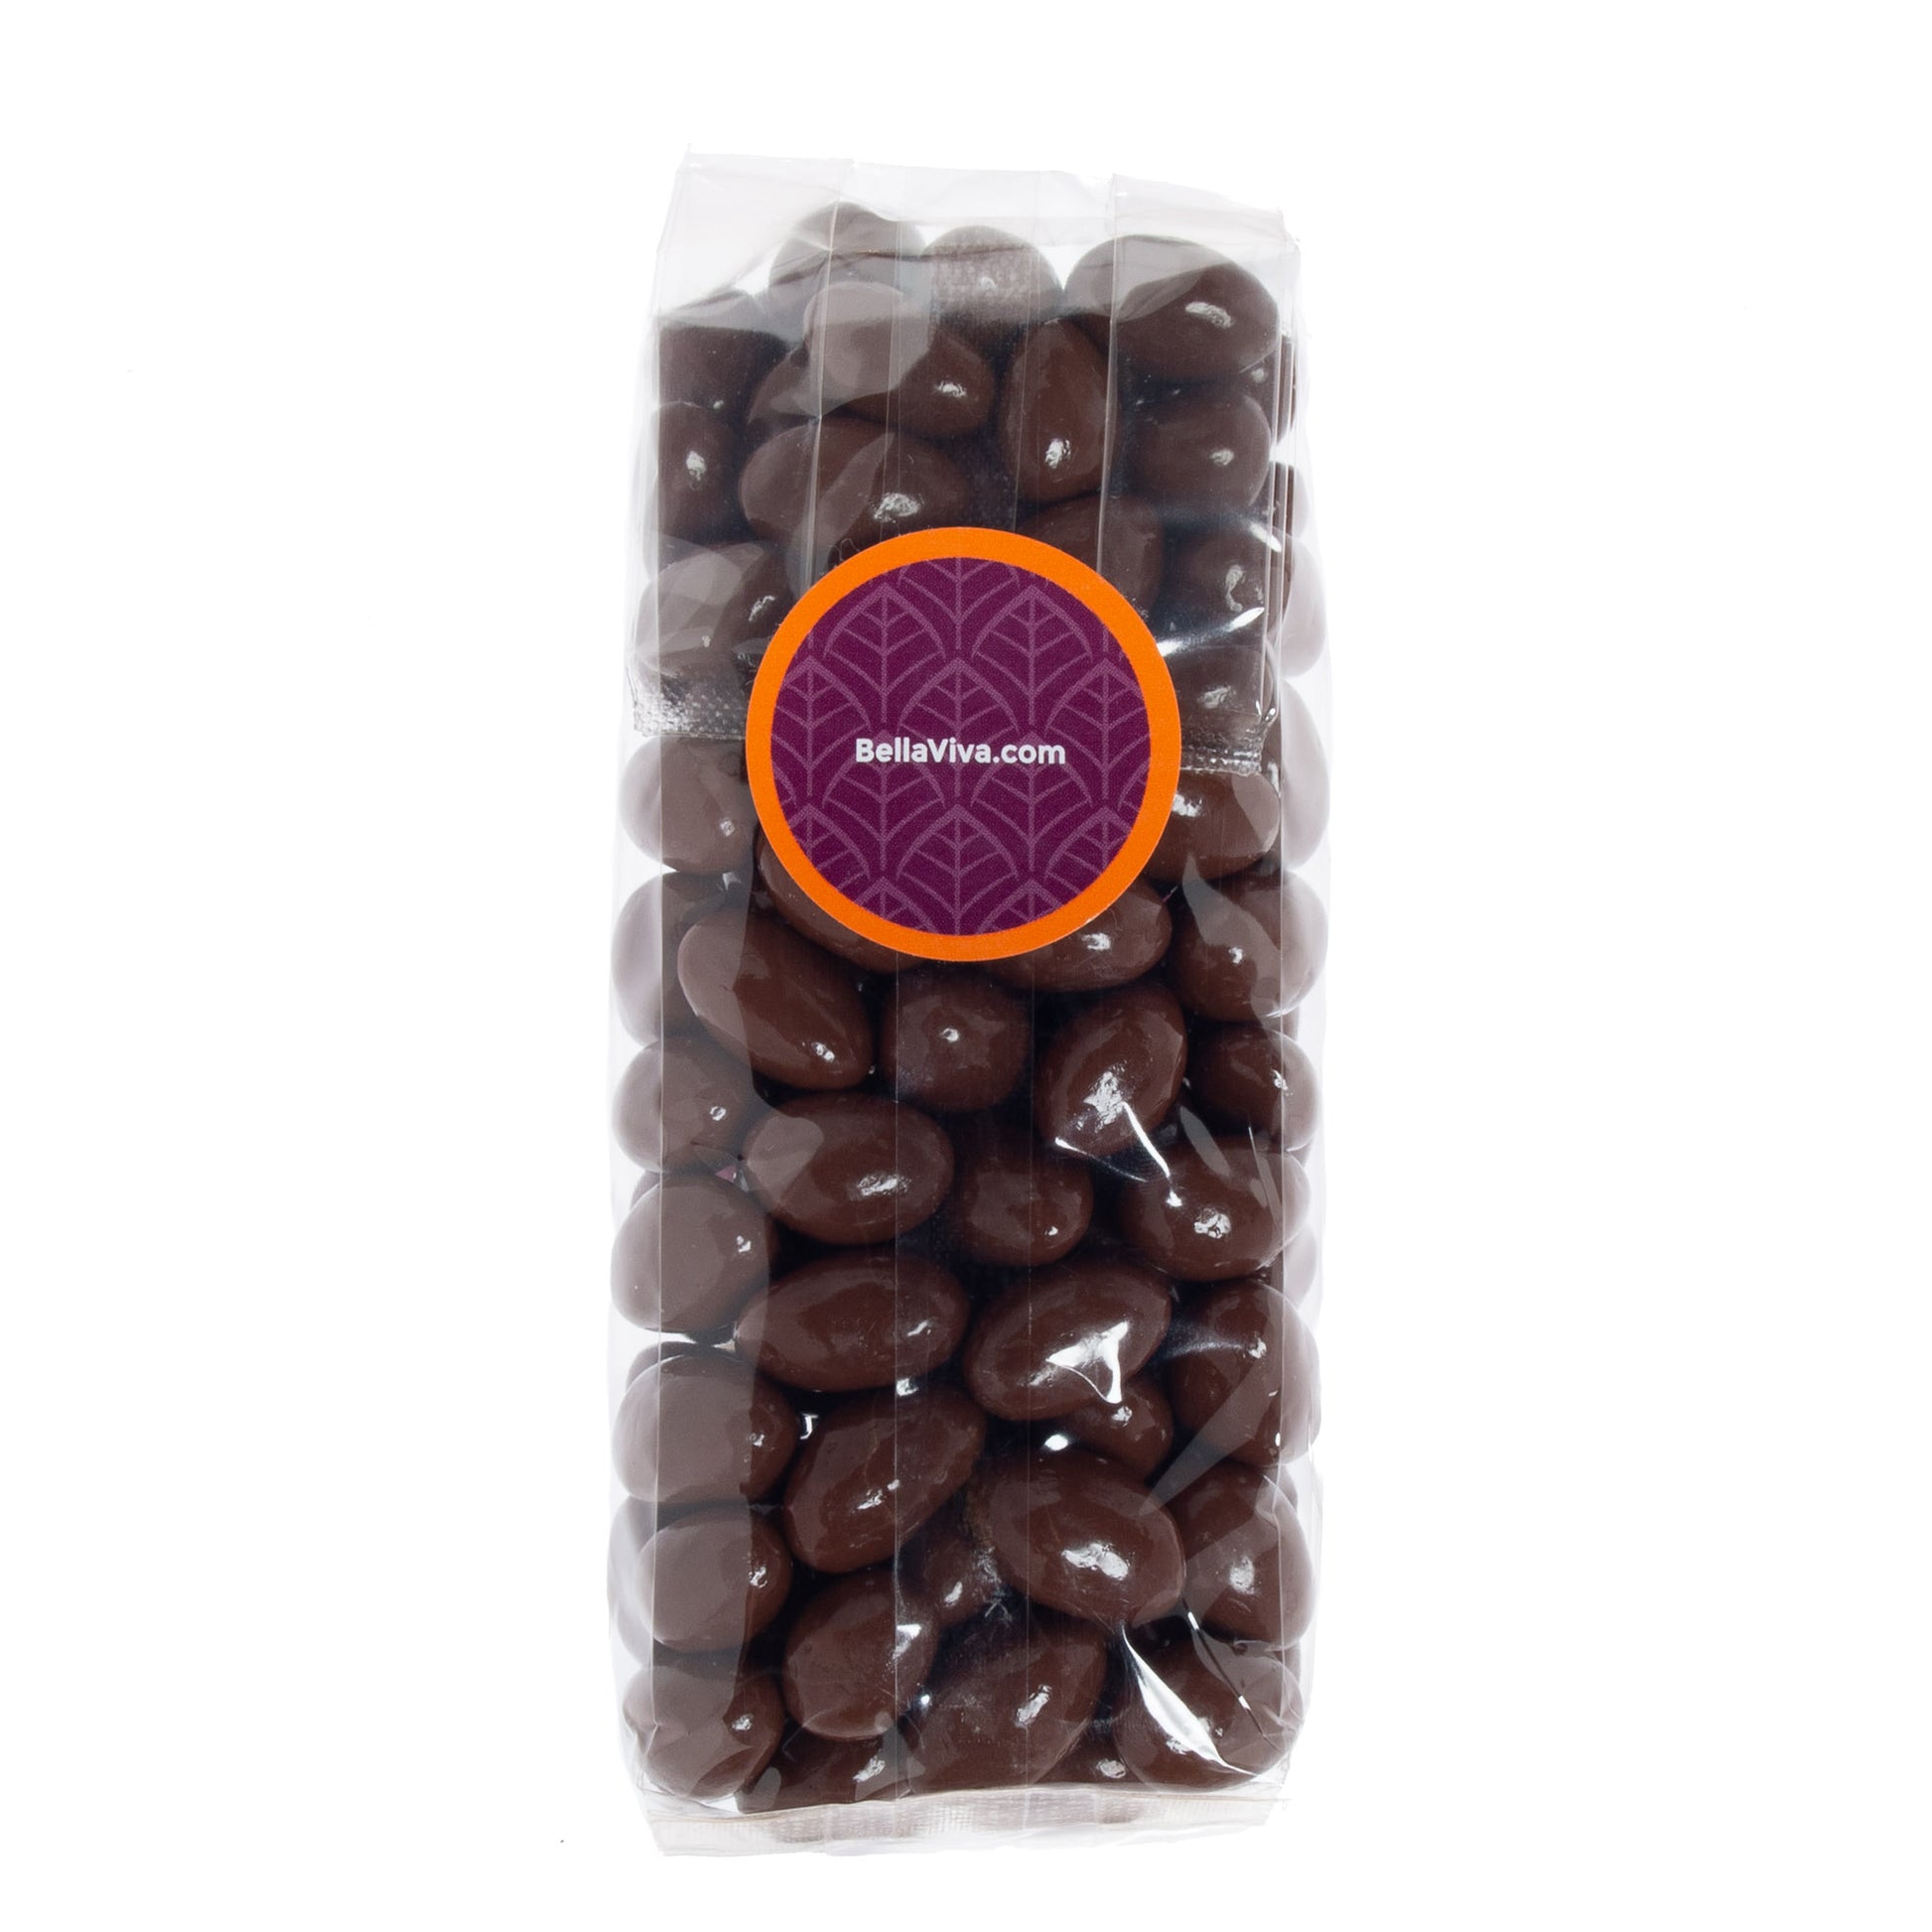 Chocolate Covered Toffee Pistachios, 8oz Gift Bag